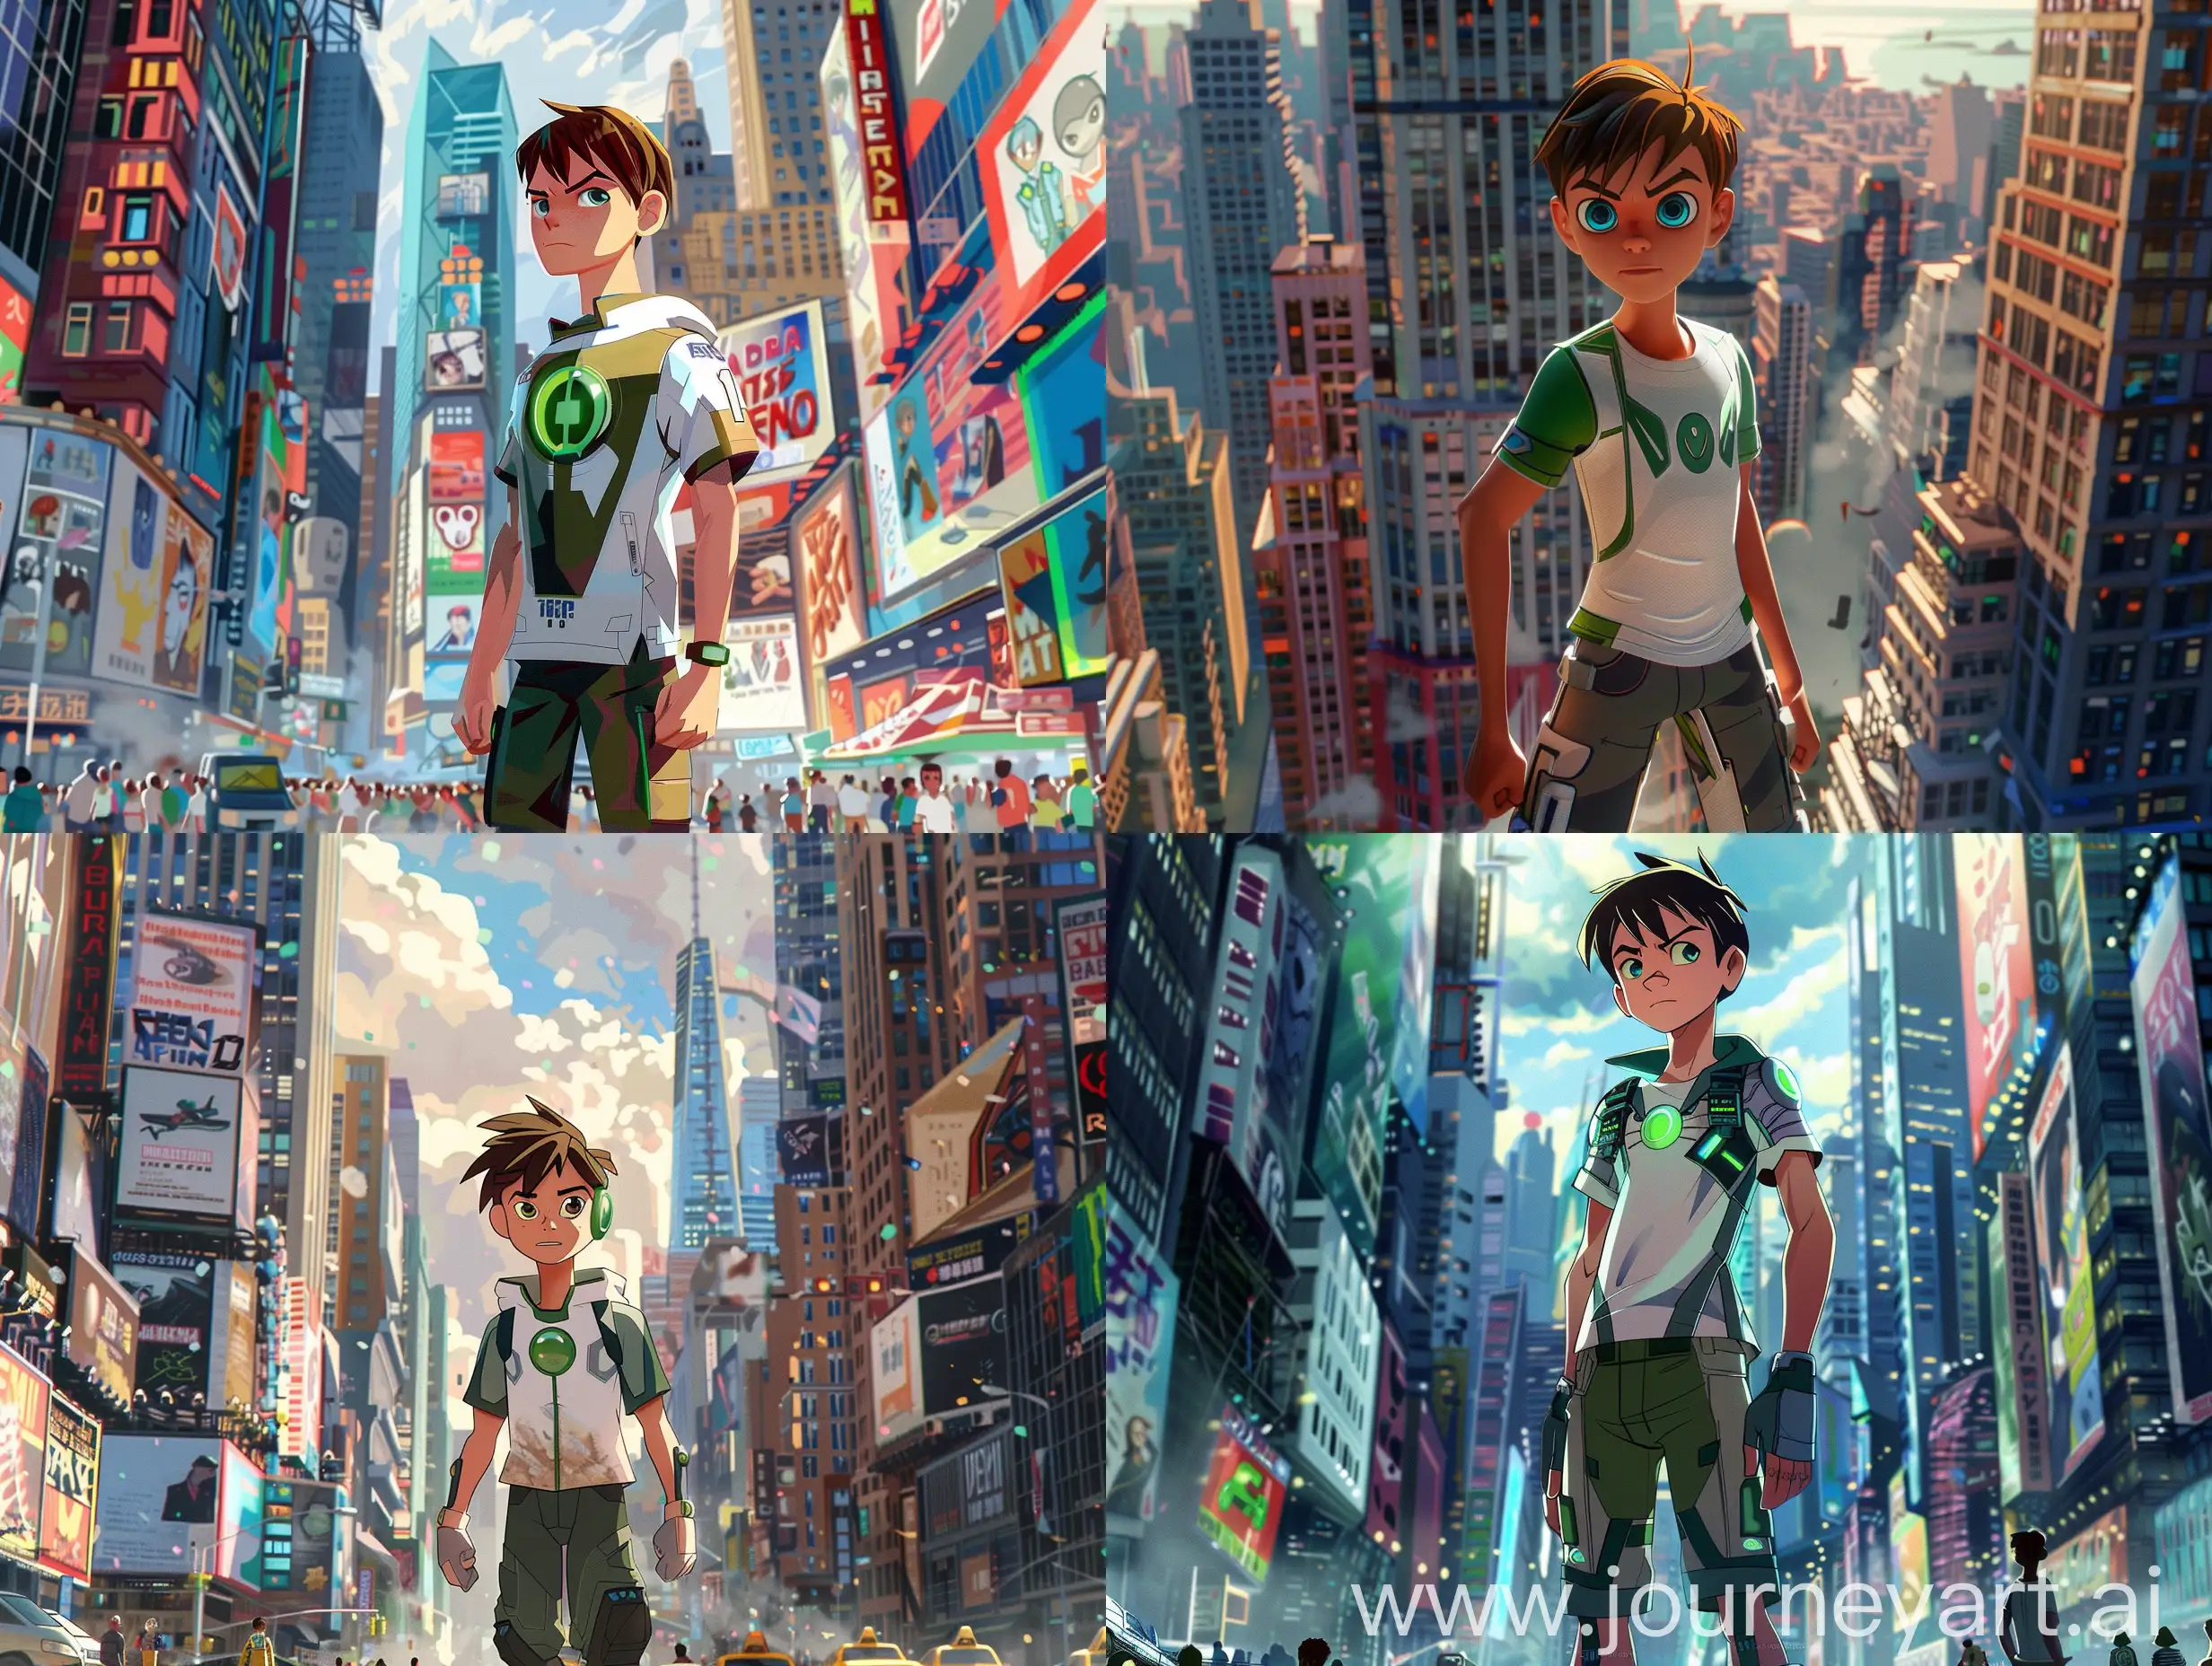 Ben 10, the iconic animated character, stands confidently amidst a bustling cityscape, his presence commanding attention. Render in a photorealistic style with intricate details and vibrant colors.